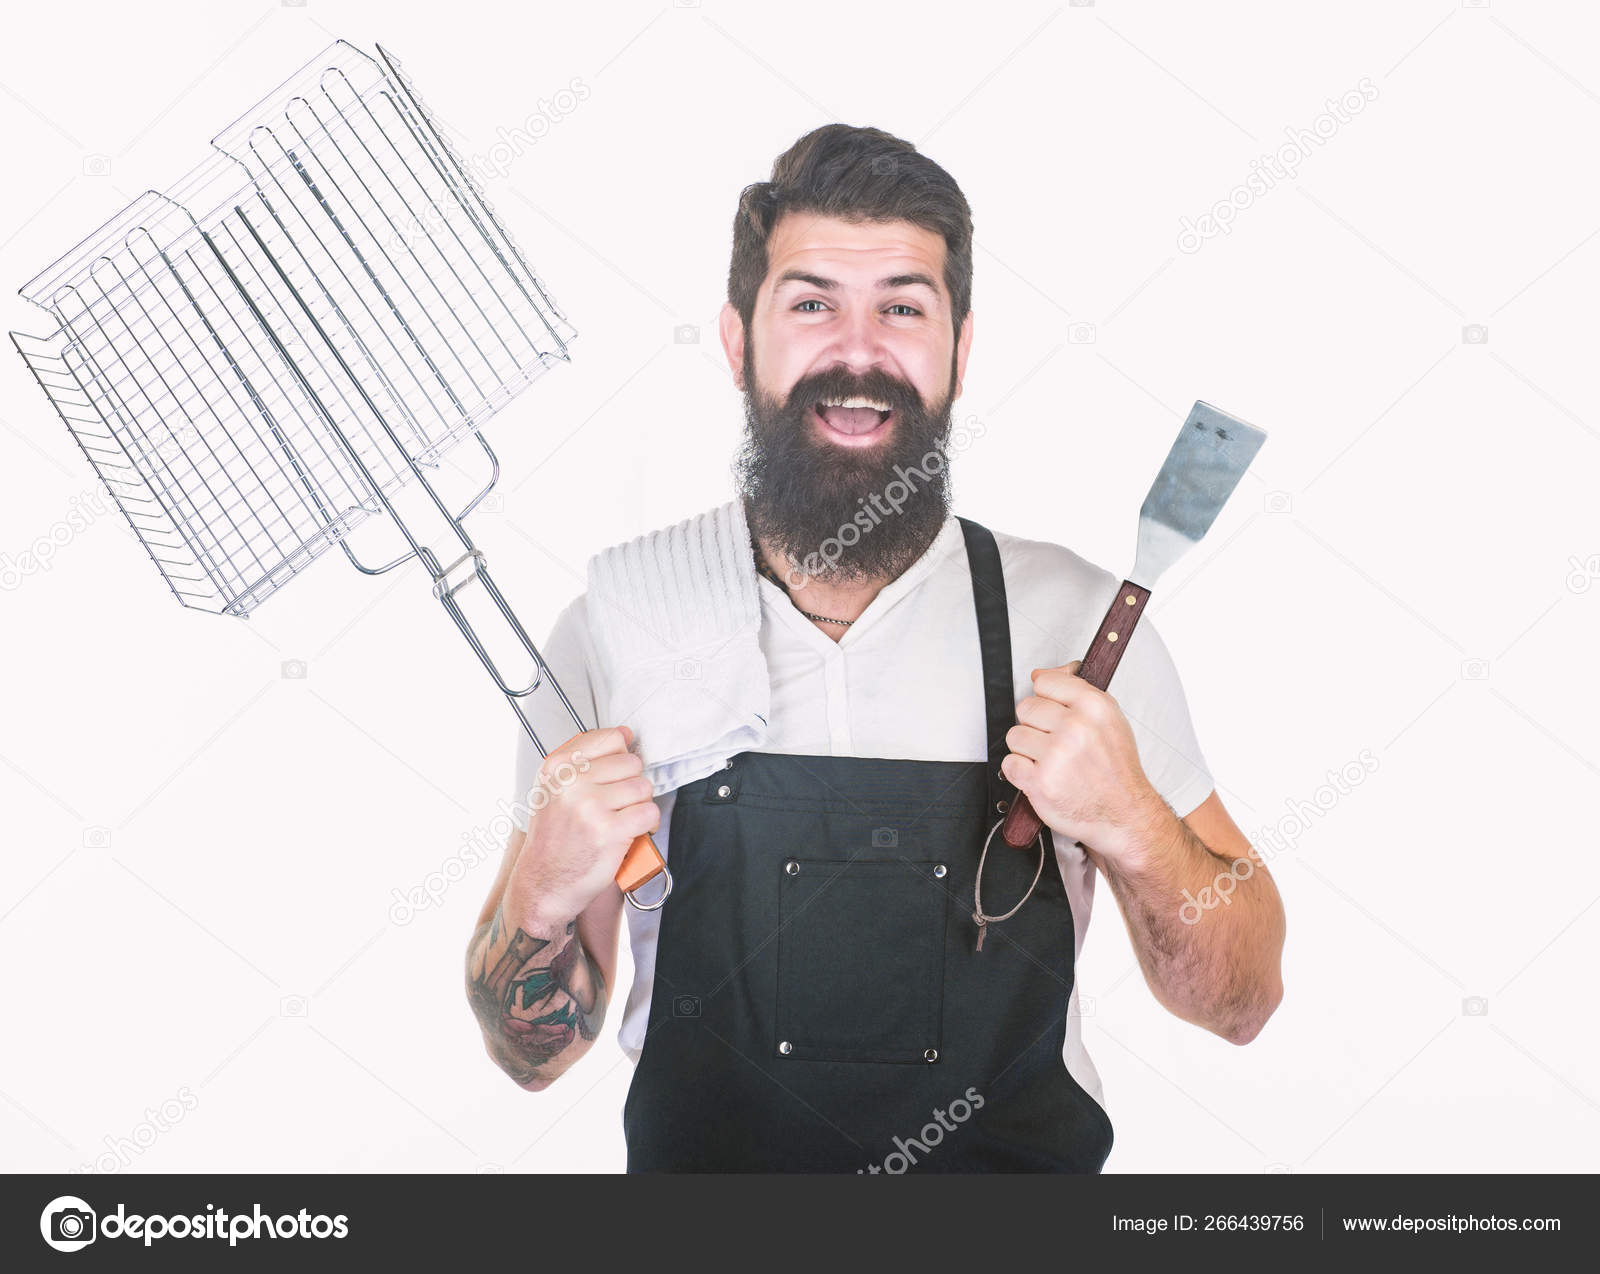 Bbq Is A Feast Cook Holding Portable Grilling Basket And Spatula Bearded Man With Barbecue 